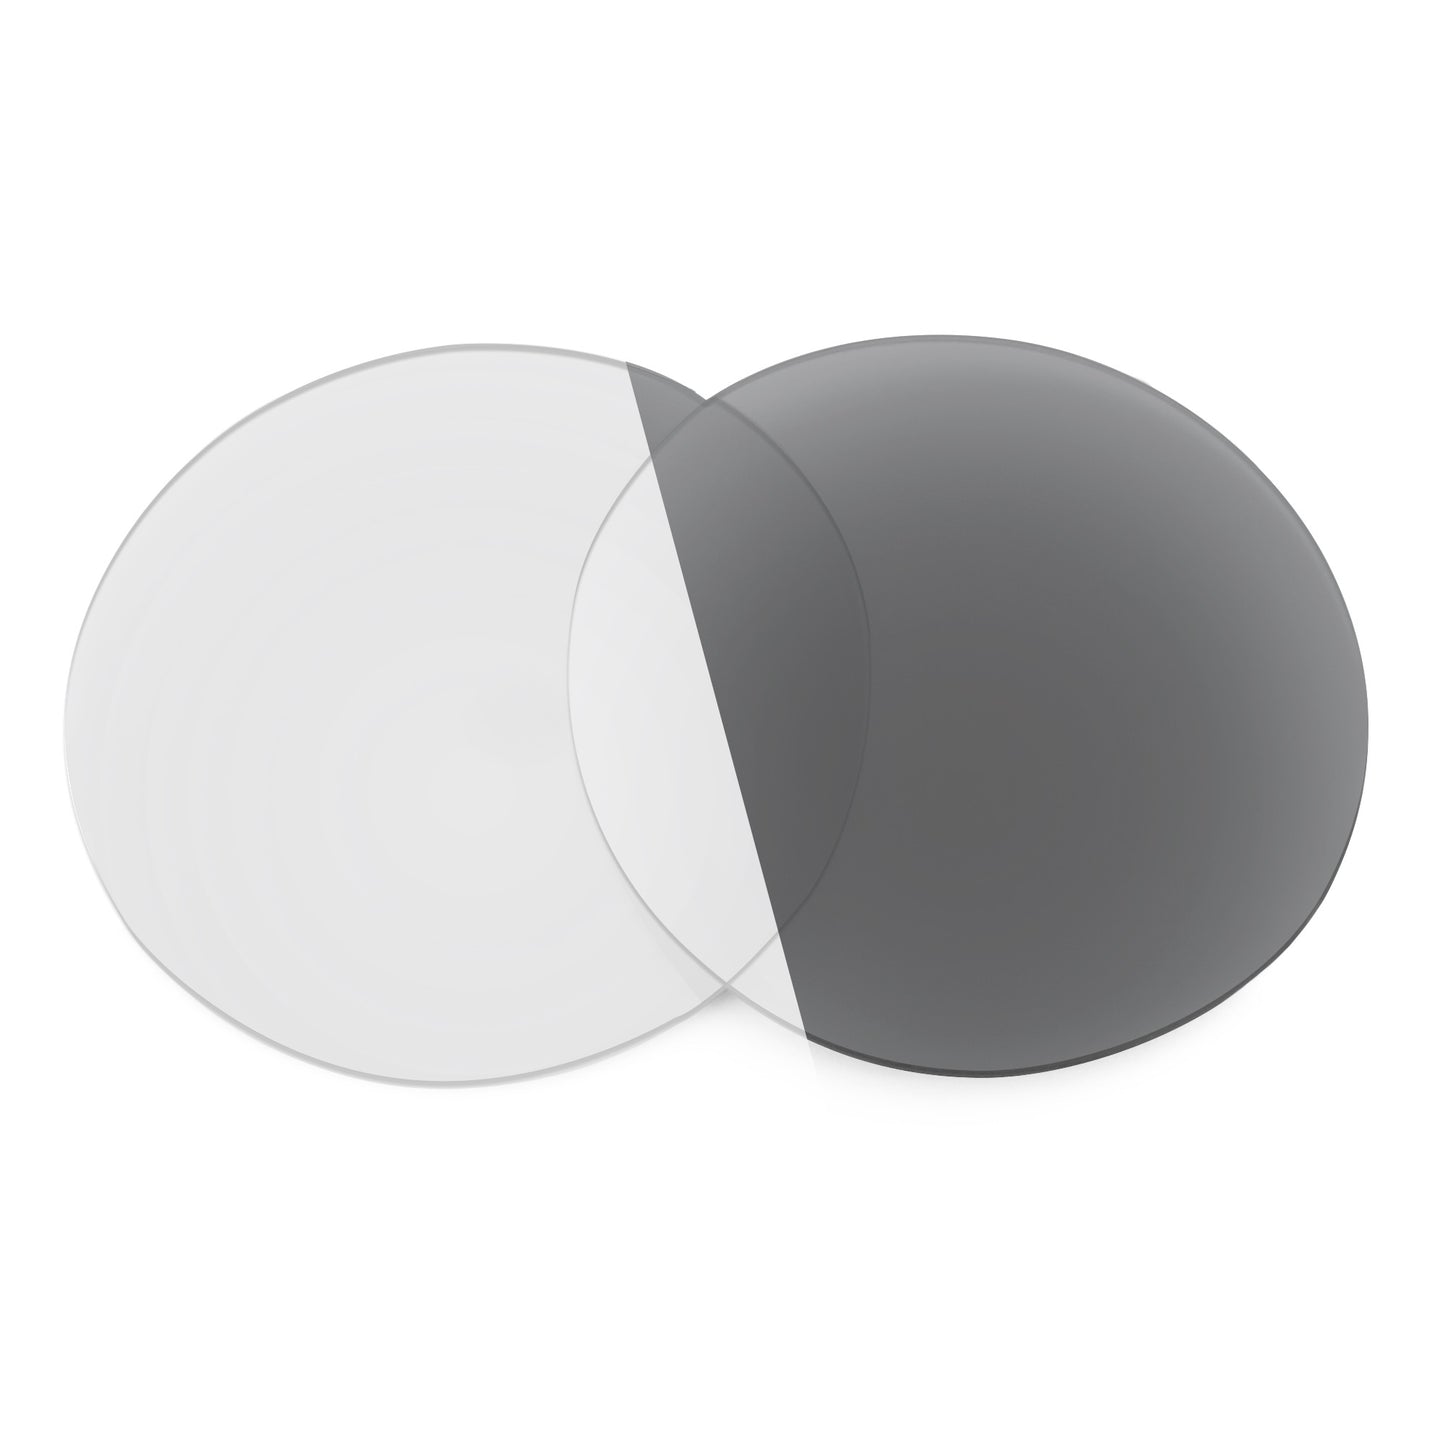 Revant replacement lenses for Ray-Ban RB4191 57mm Non-Polarized Adapt Gray Photochromic